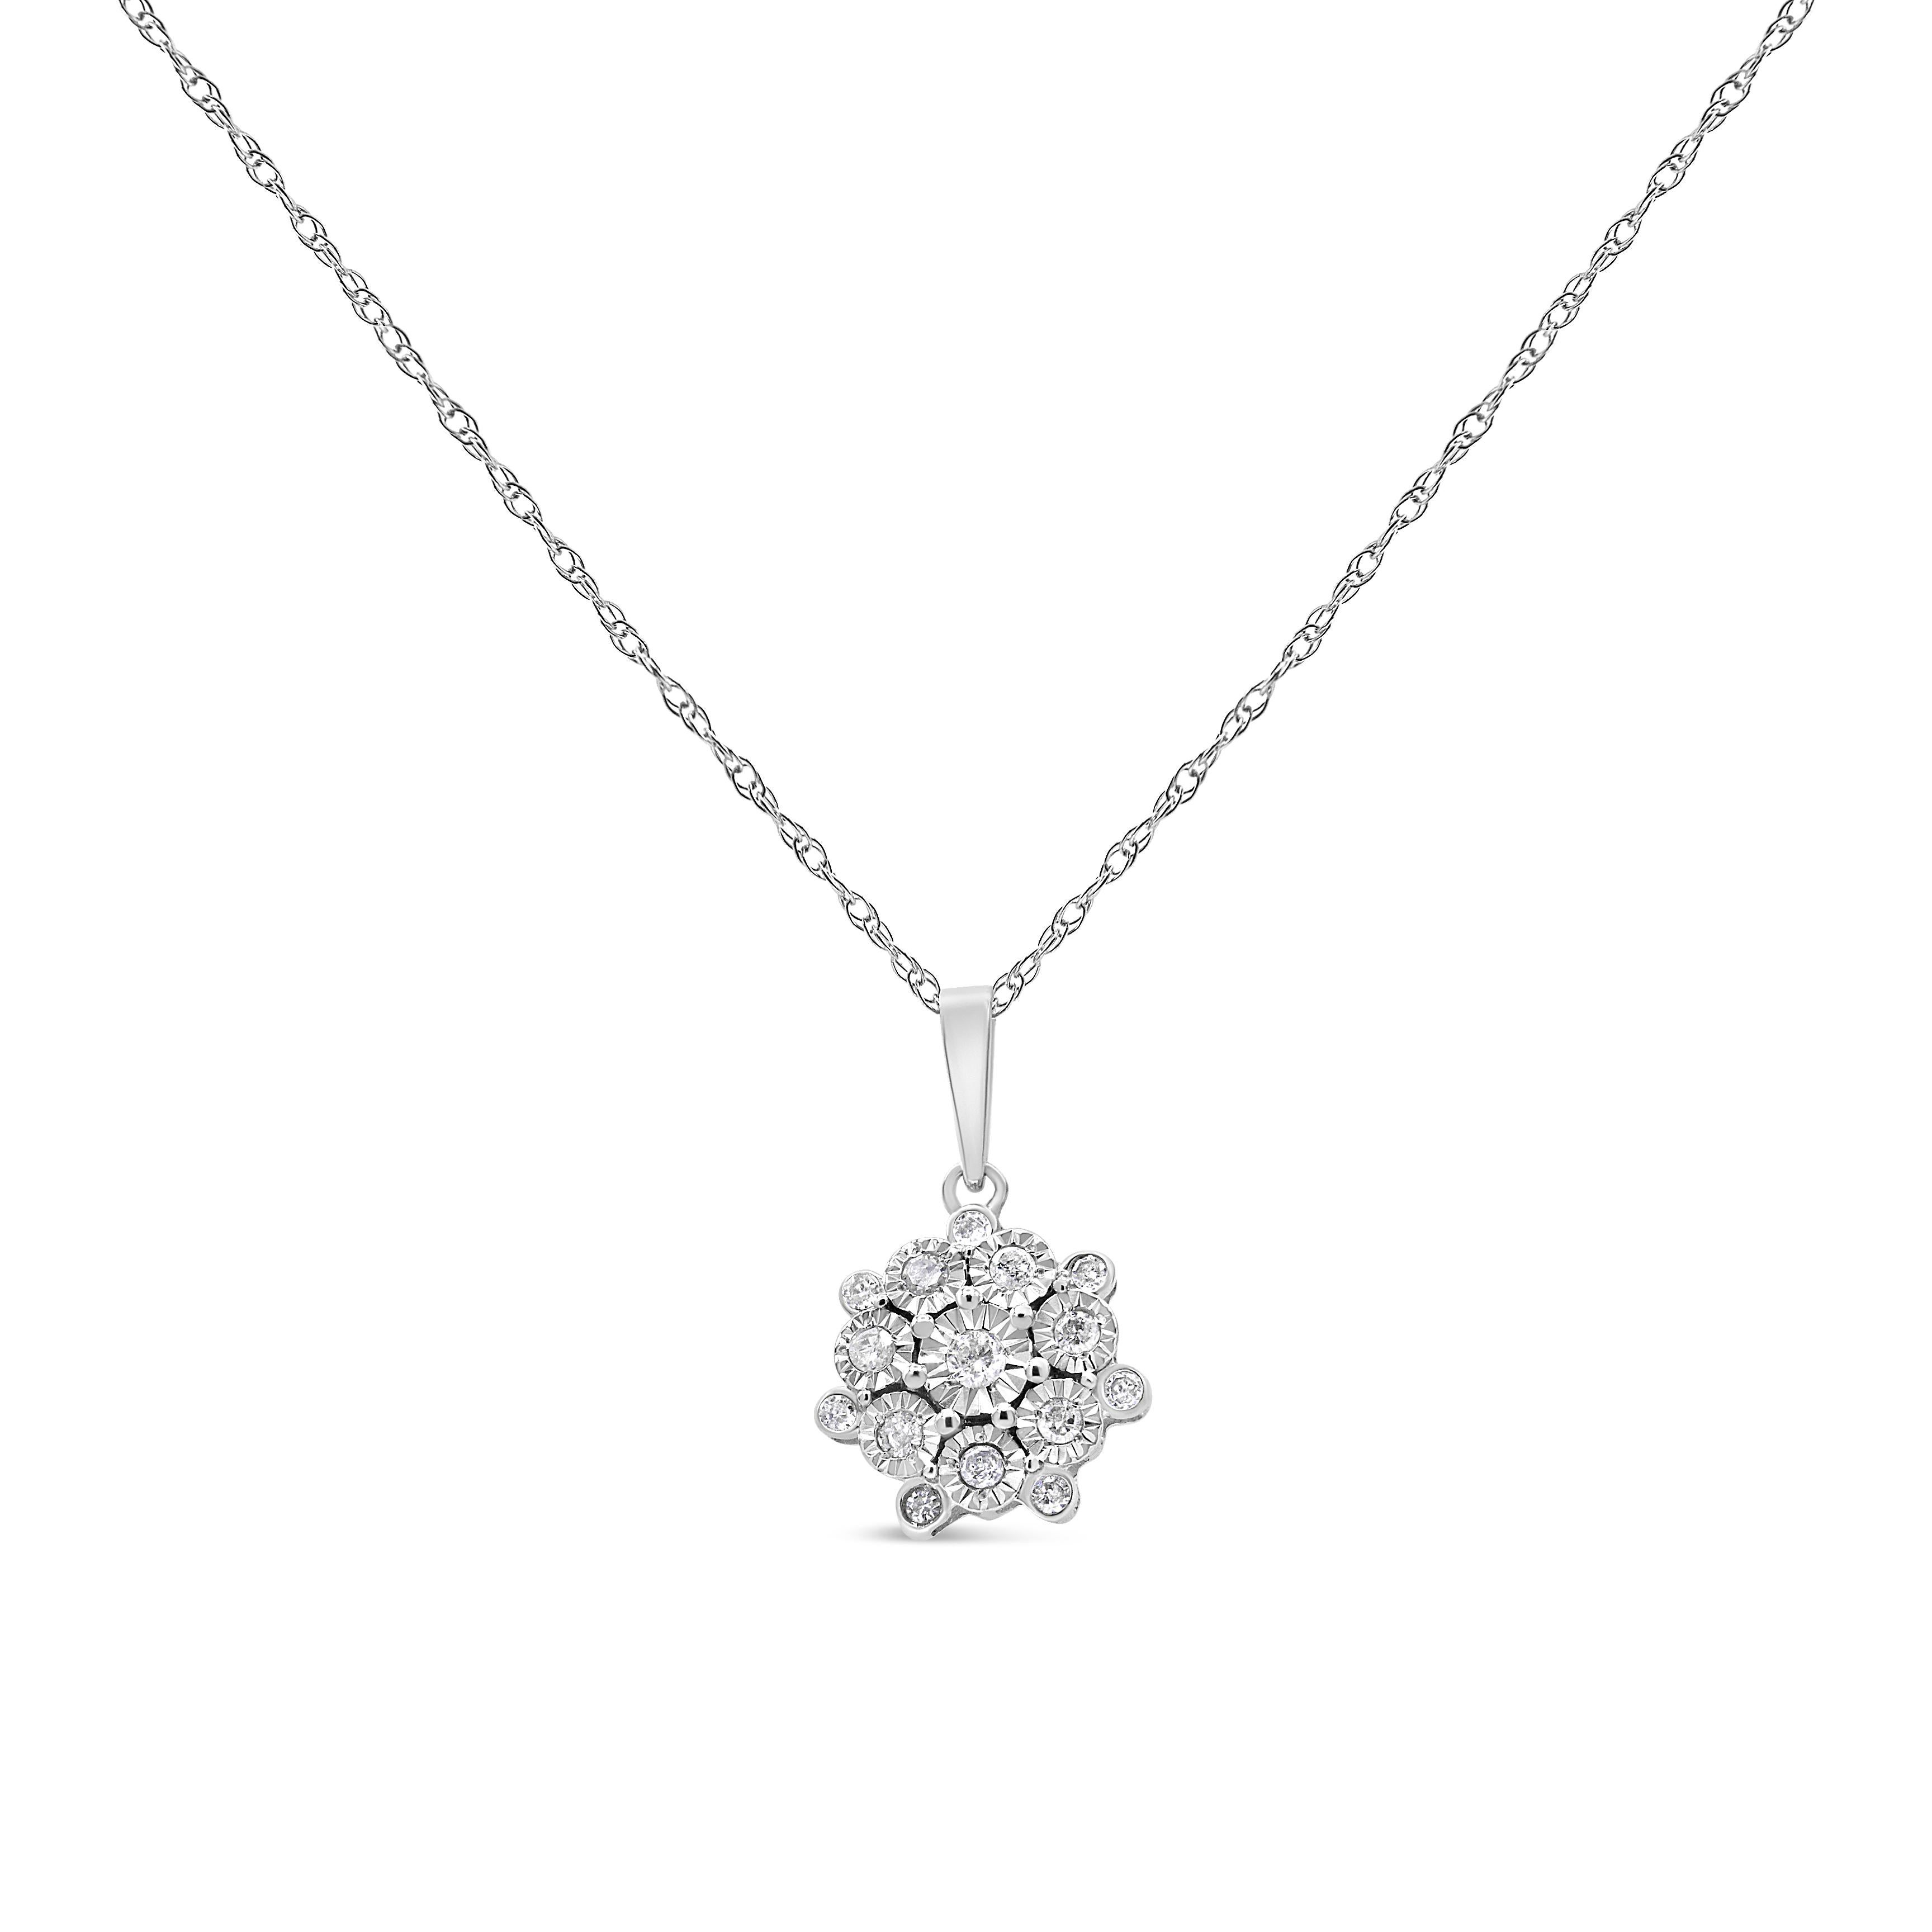 Contemporary .925 Sterling Silver 1/4 Carat Diamond Floral Cluster Pendant Necklace For Sale